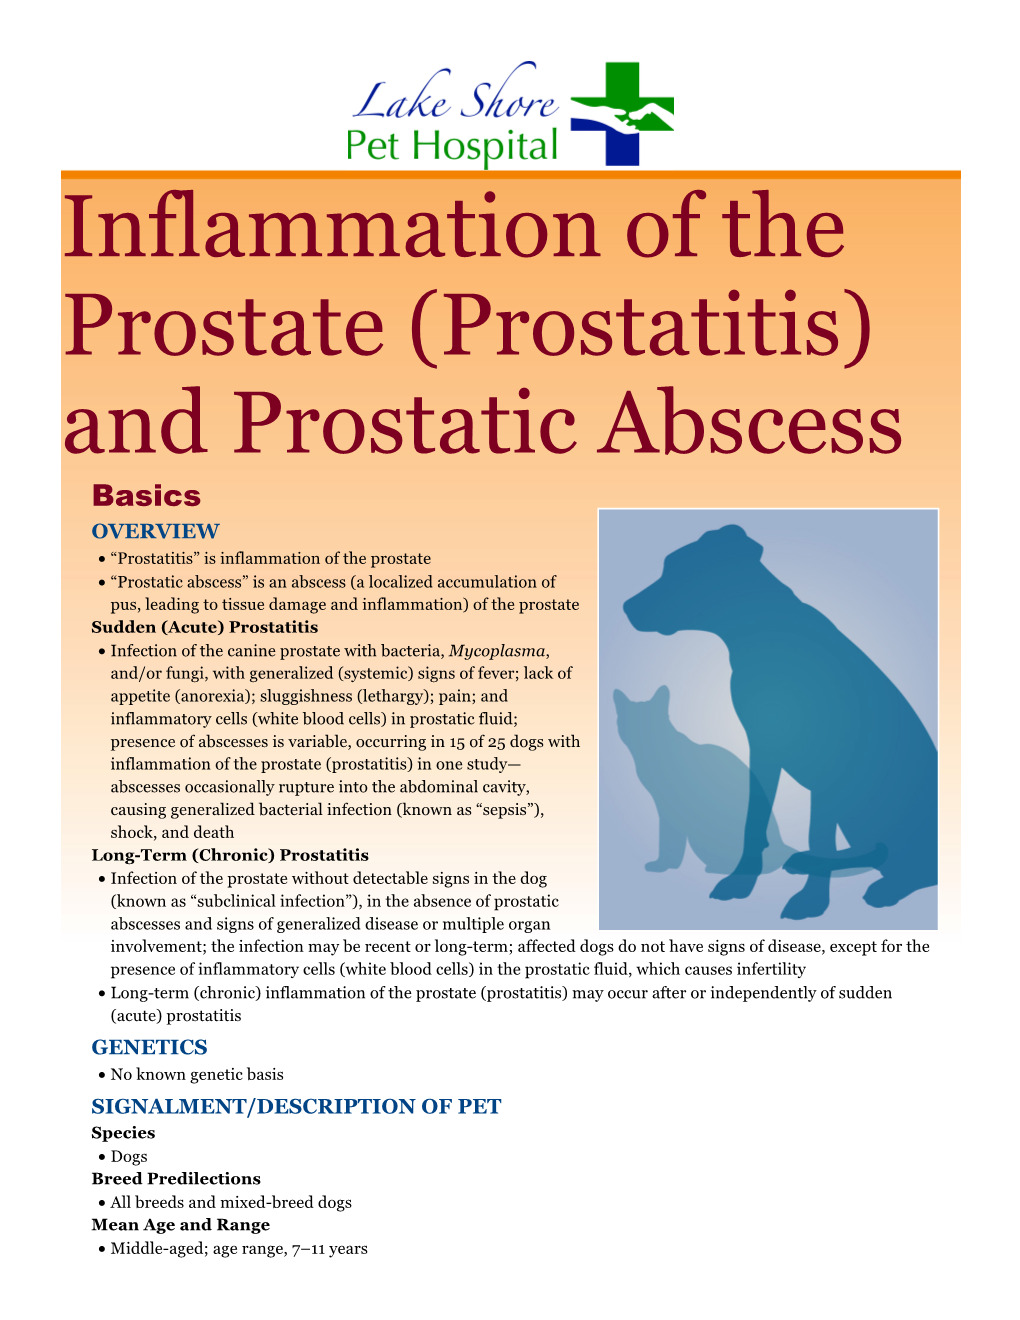 Inflammation of the Prostate